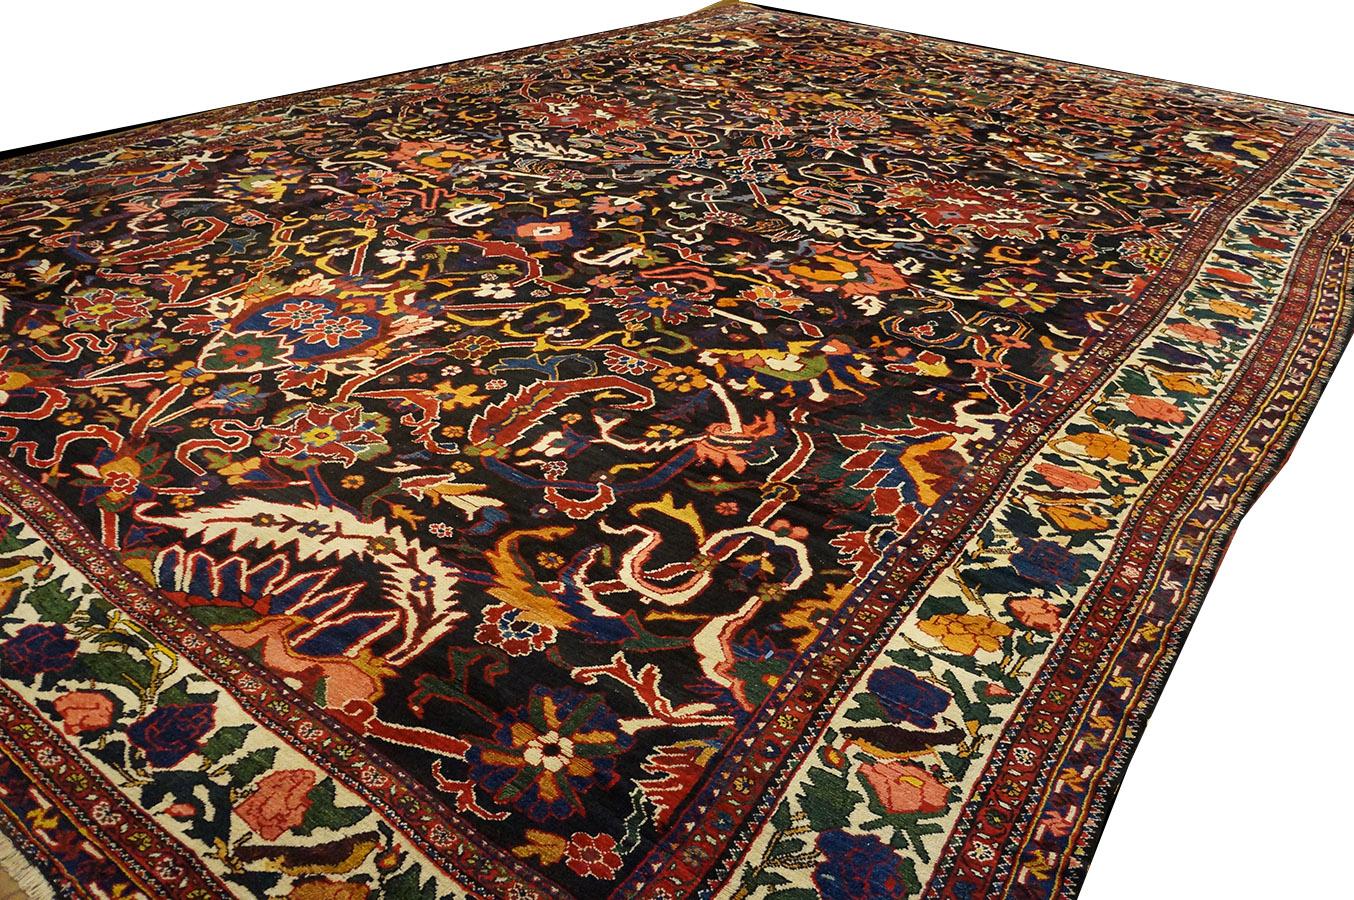 Early 20th Century Persian Bakhtiari Carpet ( 16' x 23' - 487 x 702 ) In Good Condition For Sale In New York, NY